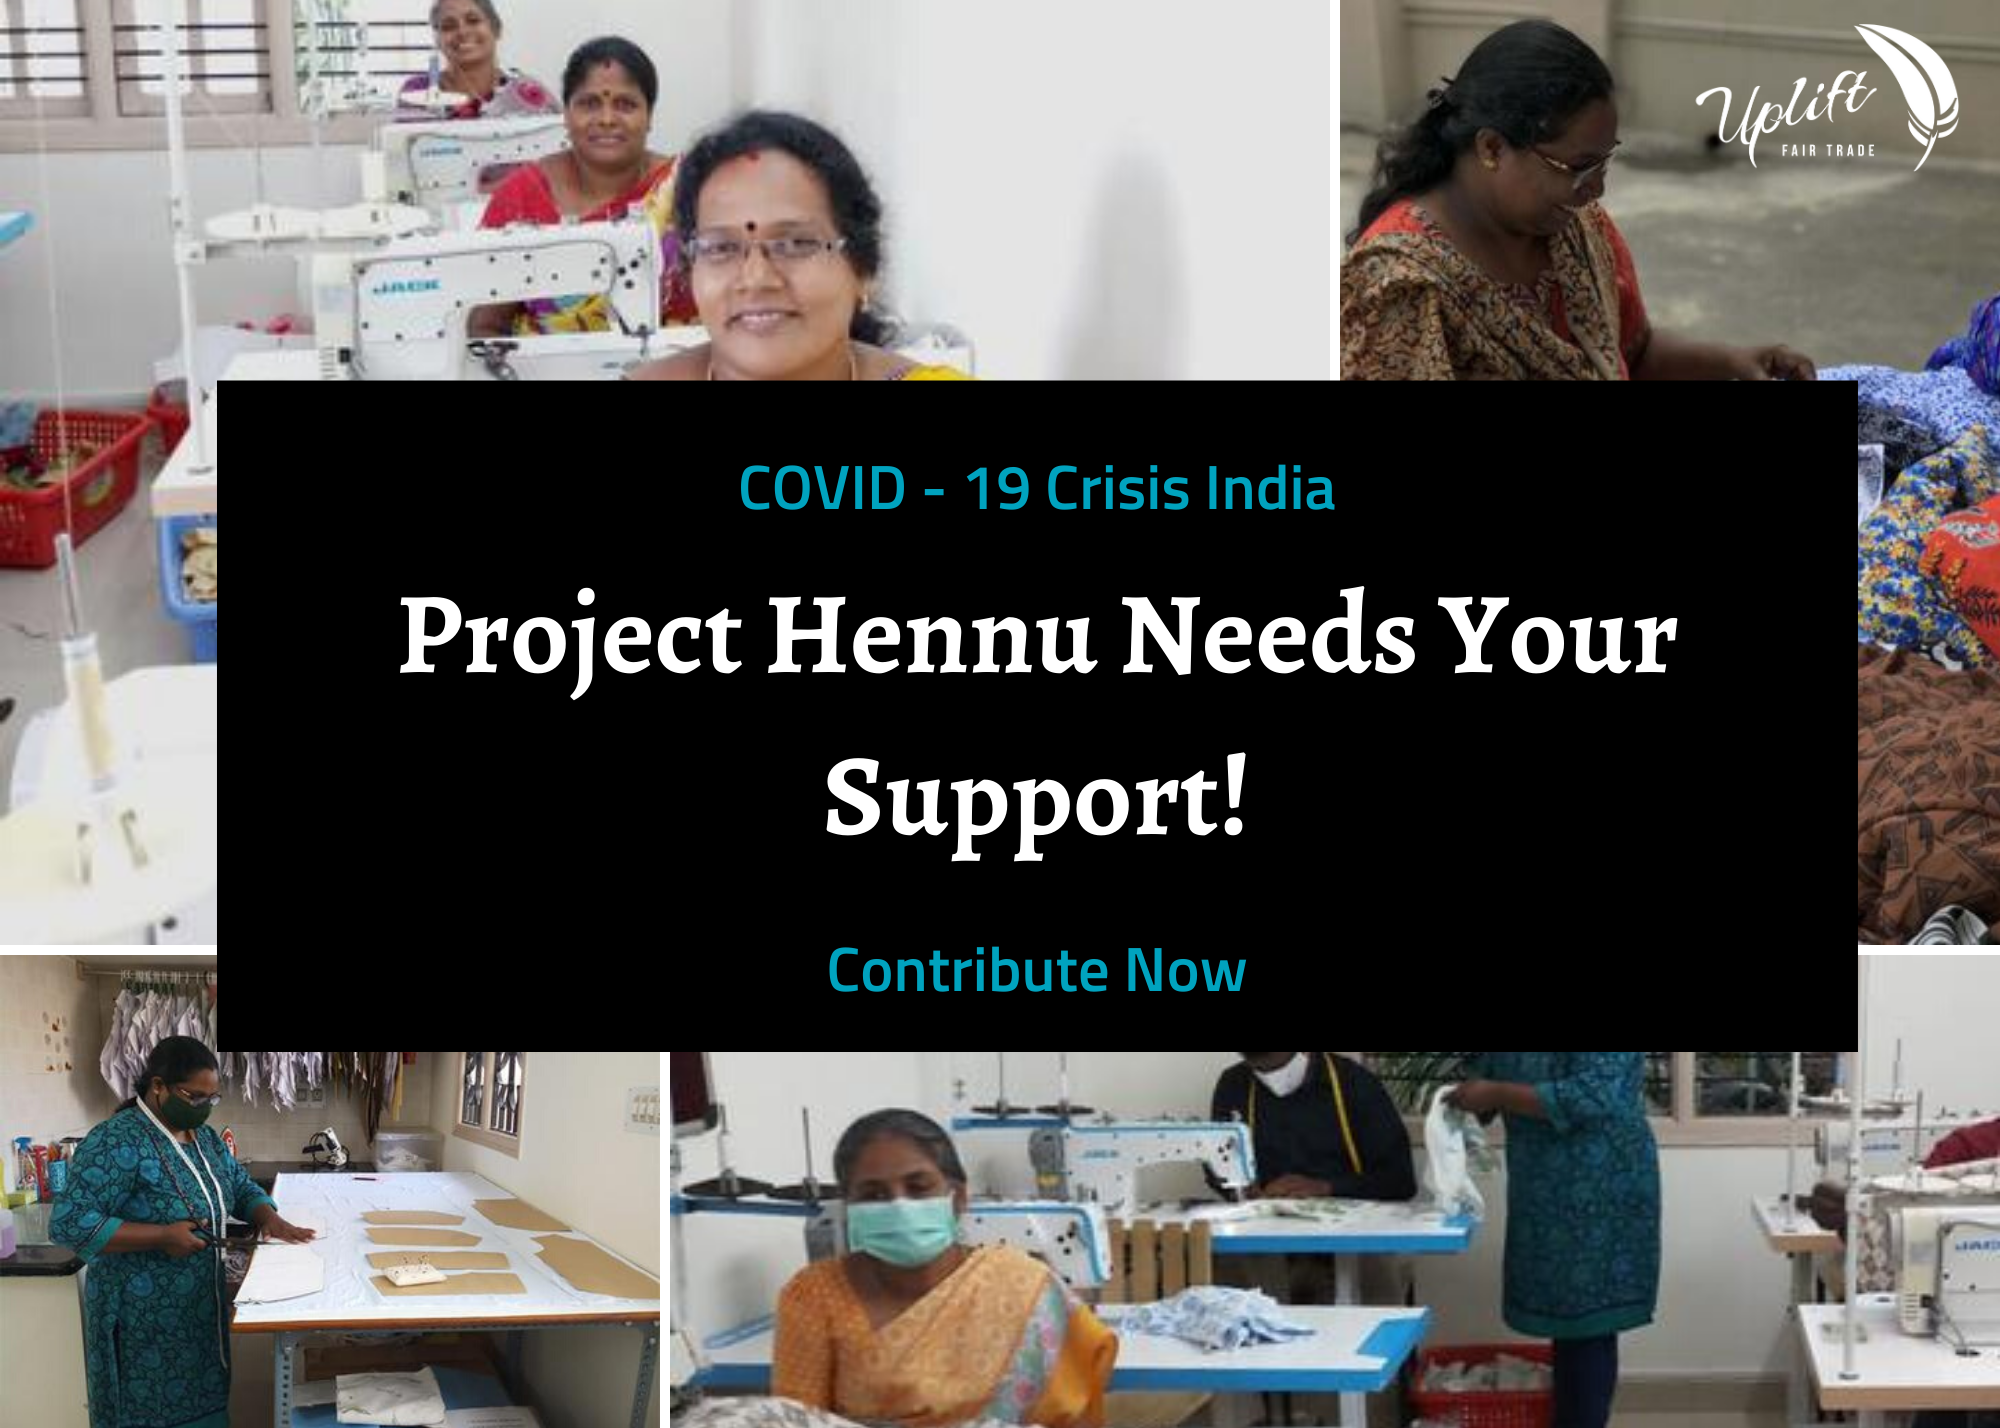 Project Hennu COVID-19 Crisis India - We Need Your Support!